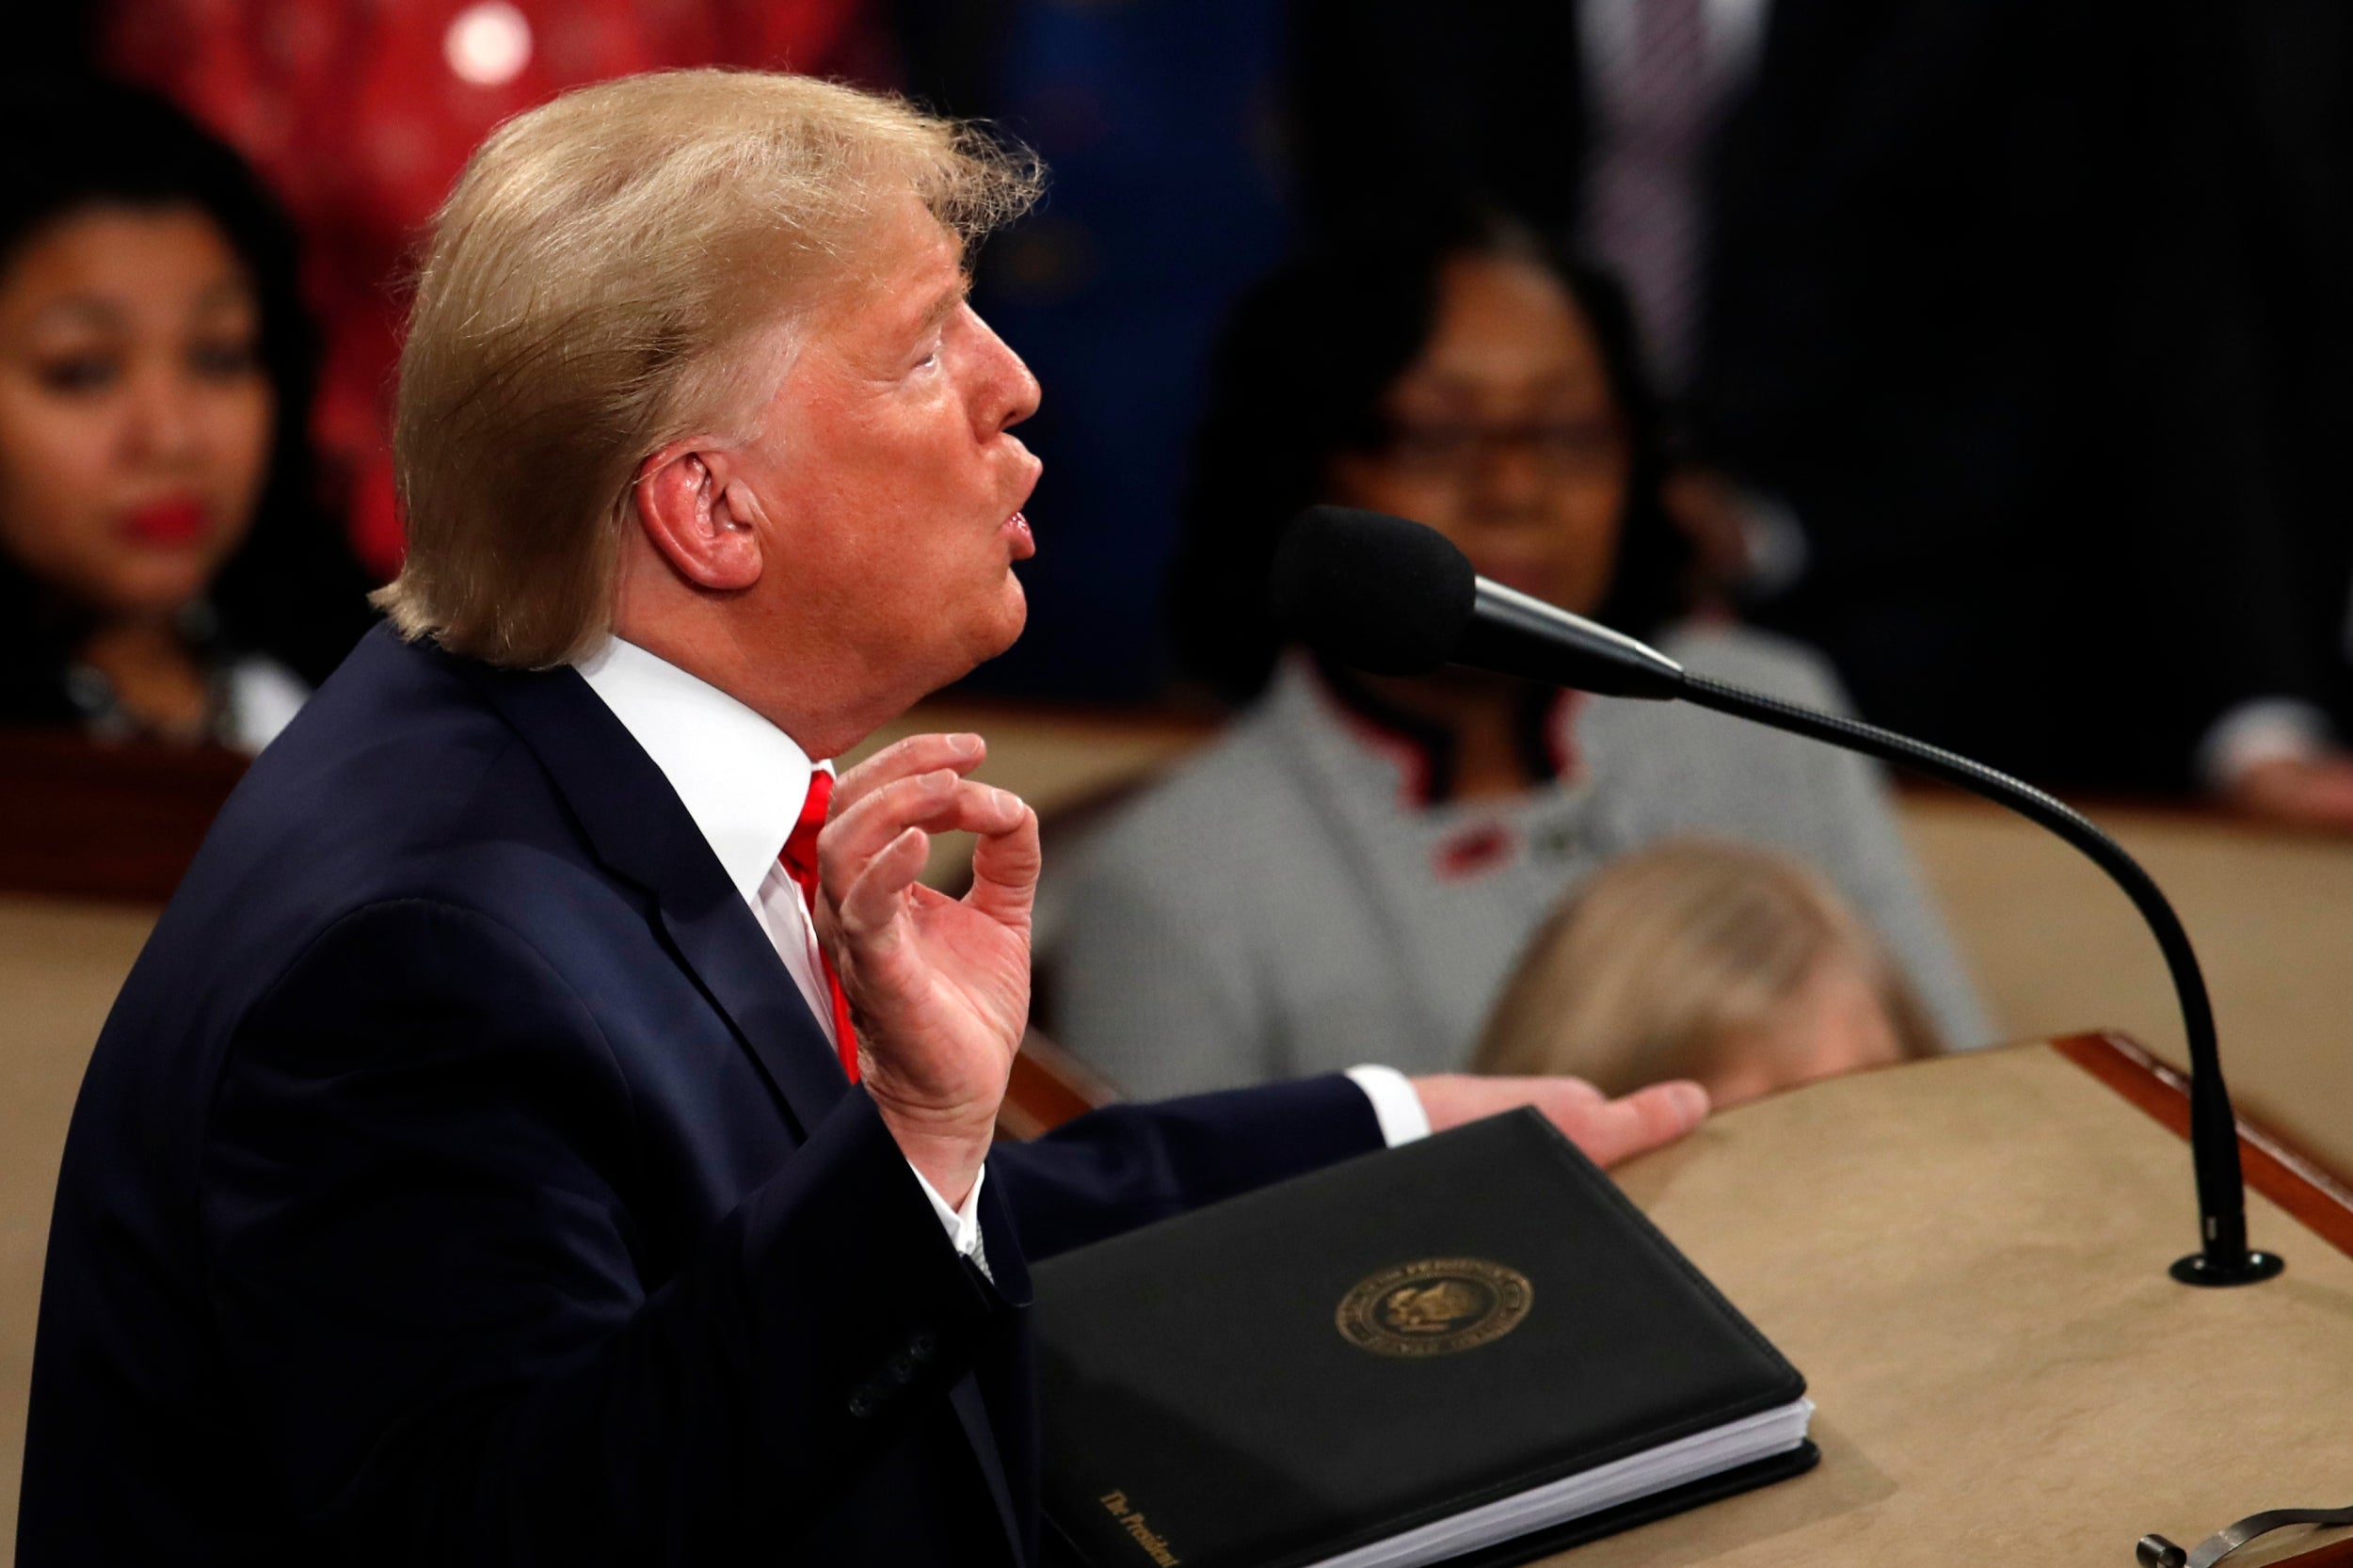 Donald Trump announced a scholarship to a Philadelphia student who attends a sought-after charter school in his rebuke of 'failing government schools' at his State of the Union.